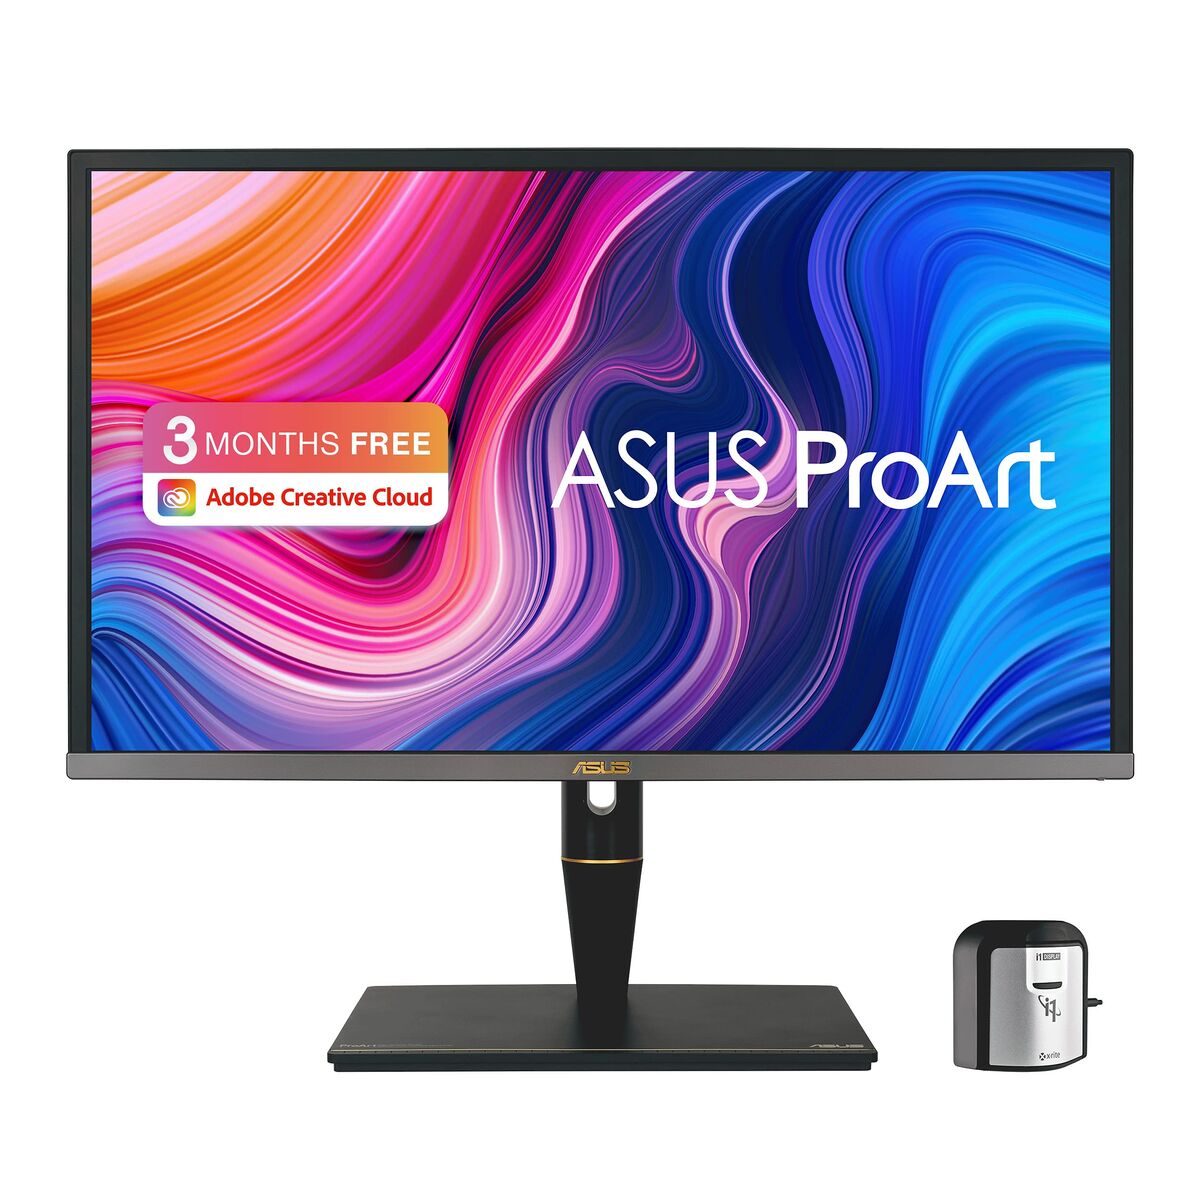 Monitor Asus 90LM04NC-B01370 27" LED IPS IPS LED HDR10 Flicker free, Asus, Computing, monitor-asus-90lm04nc-b01370-27-led-ips-ips-led-hdr10-flicker-free, :Ultra HD, Brand_Asus, category-reference-2609, category-reference-2642, category-reference-2644, category-reference-t-19685, computers / peripherals, Condition_NEW, office, Price_+ 1000, Teleworking, RiotNook